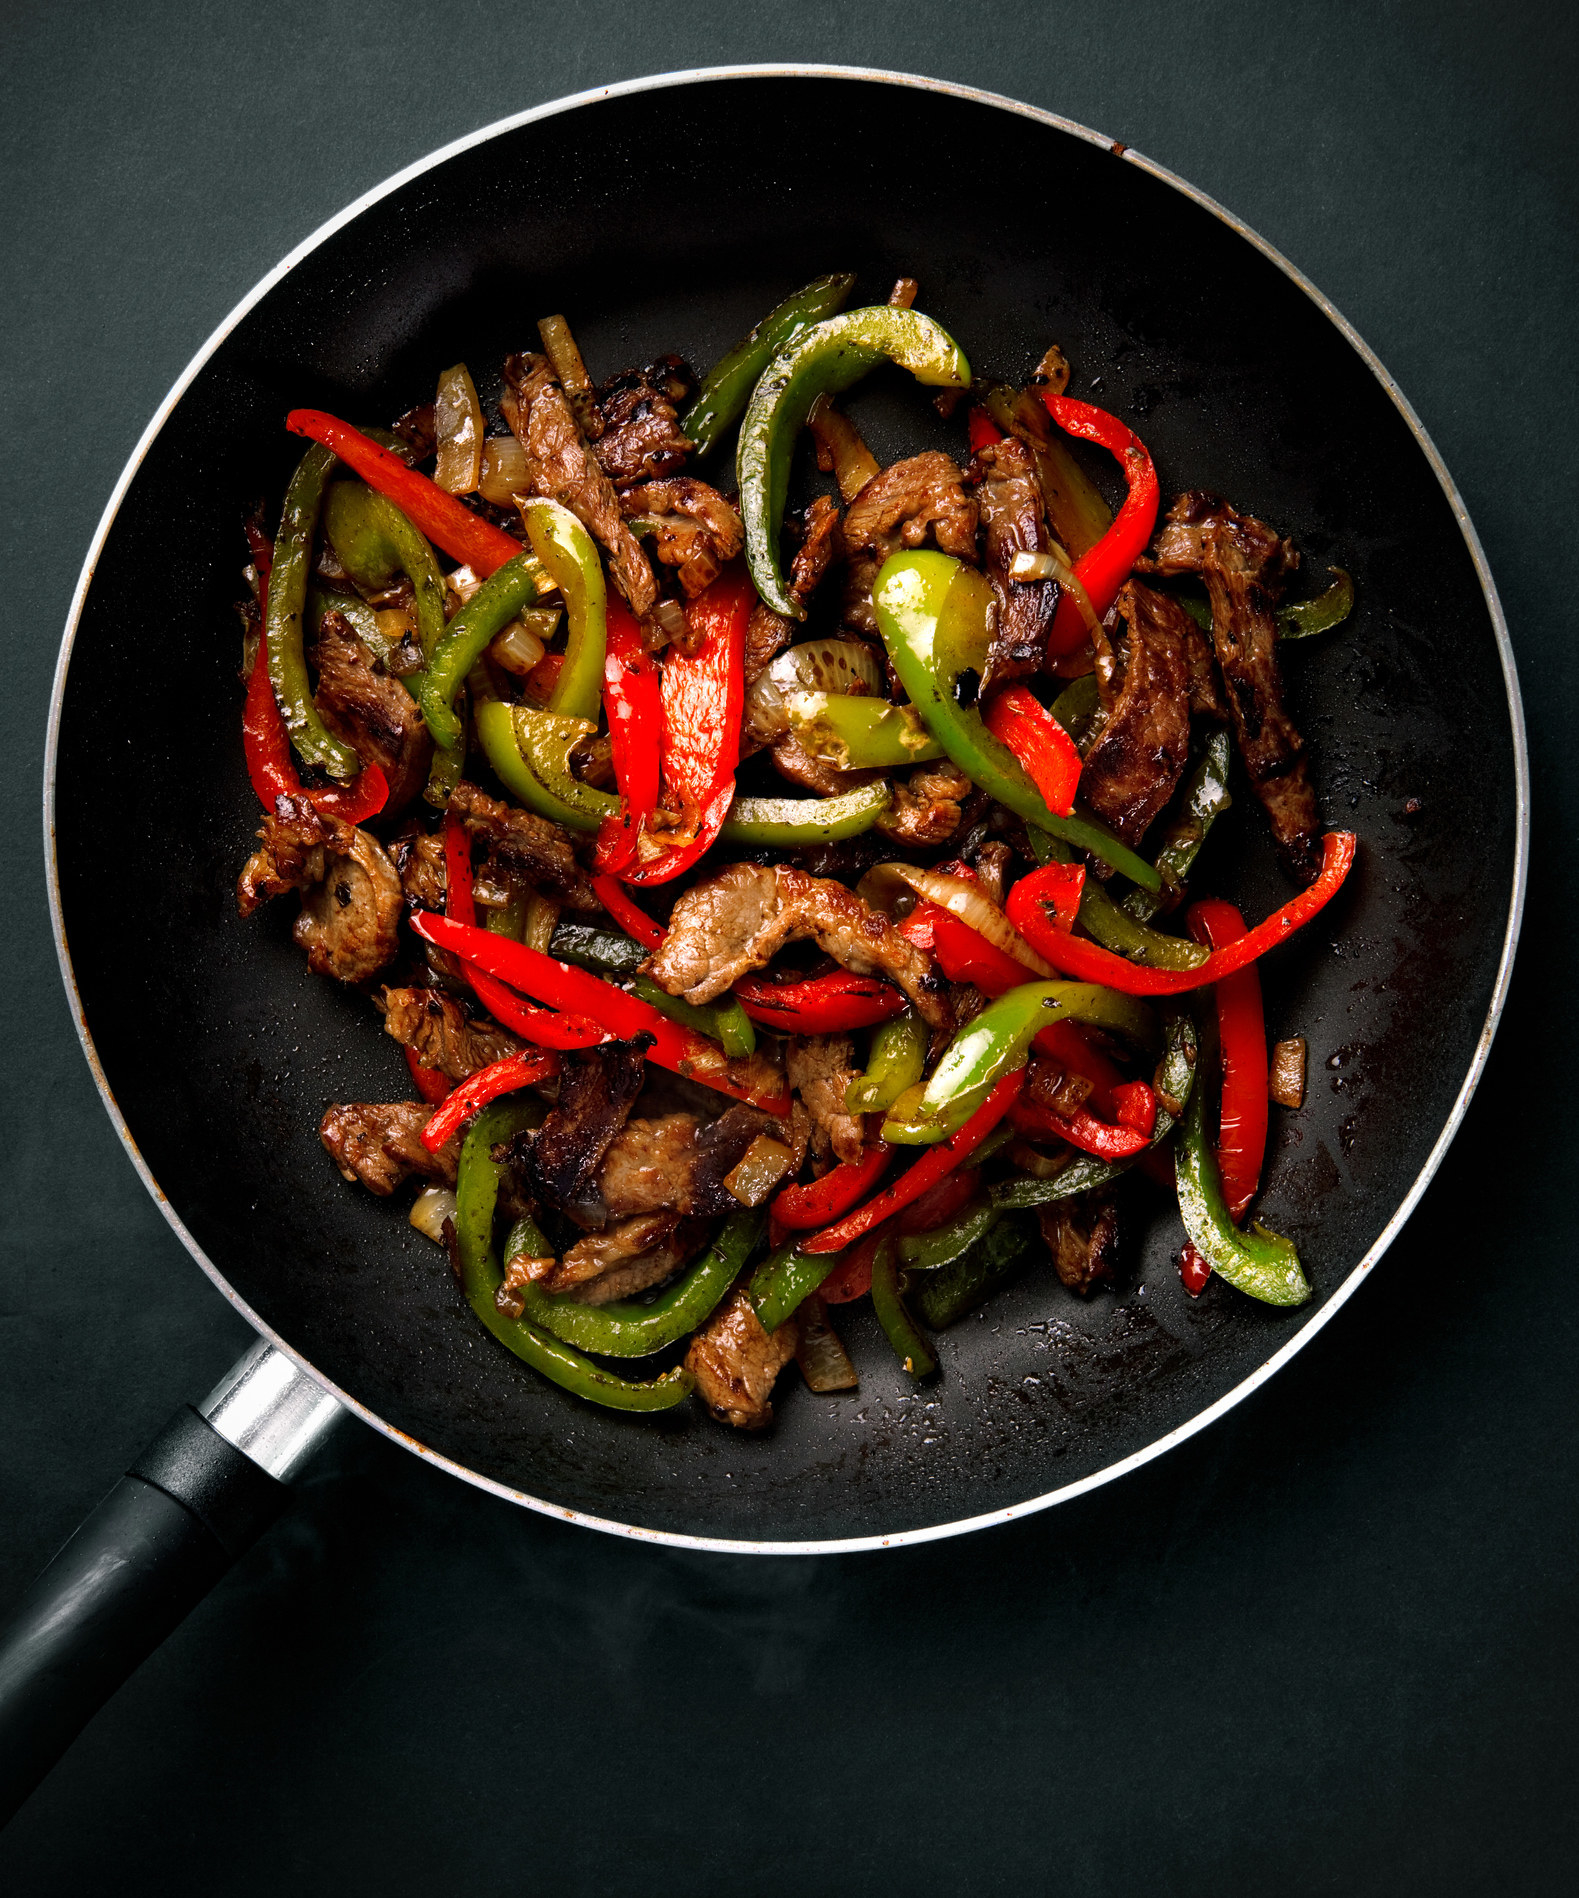 Steak and peppers in a skillet.